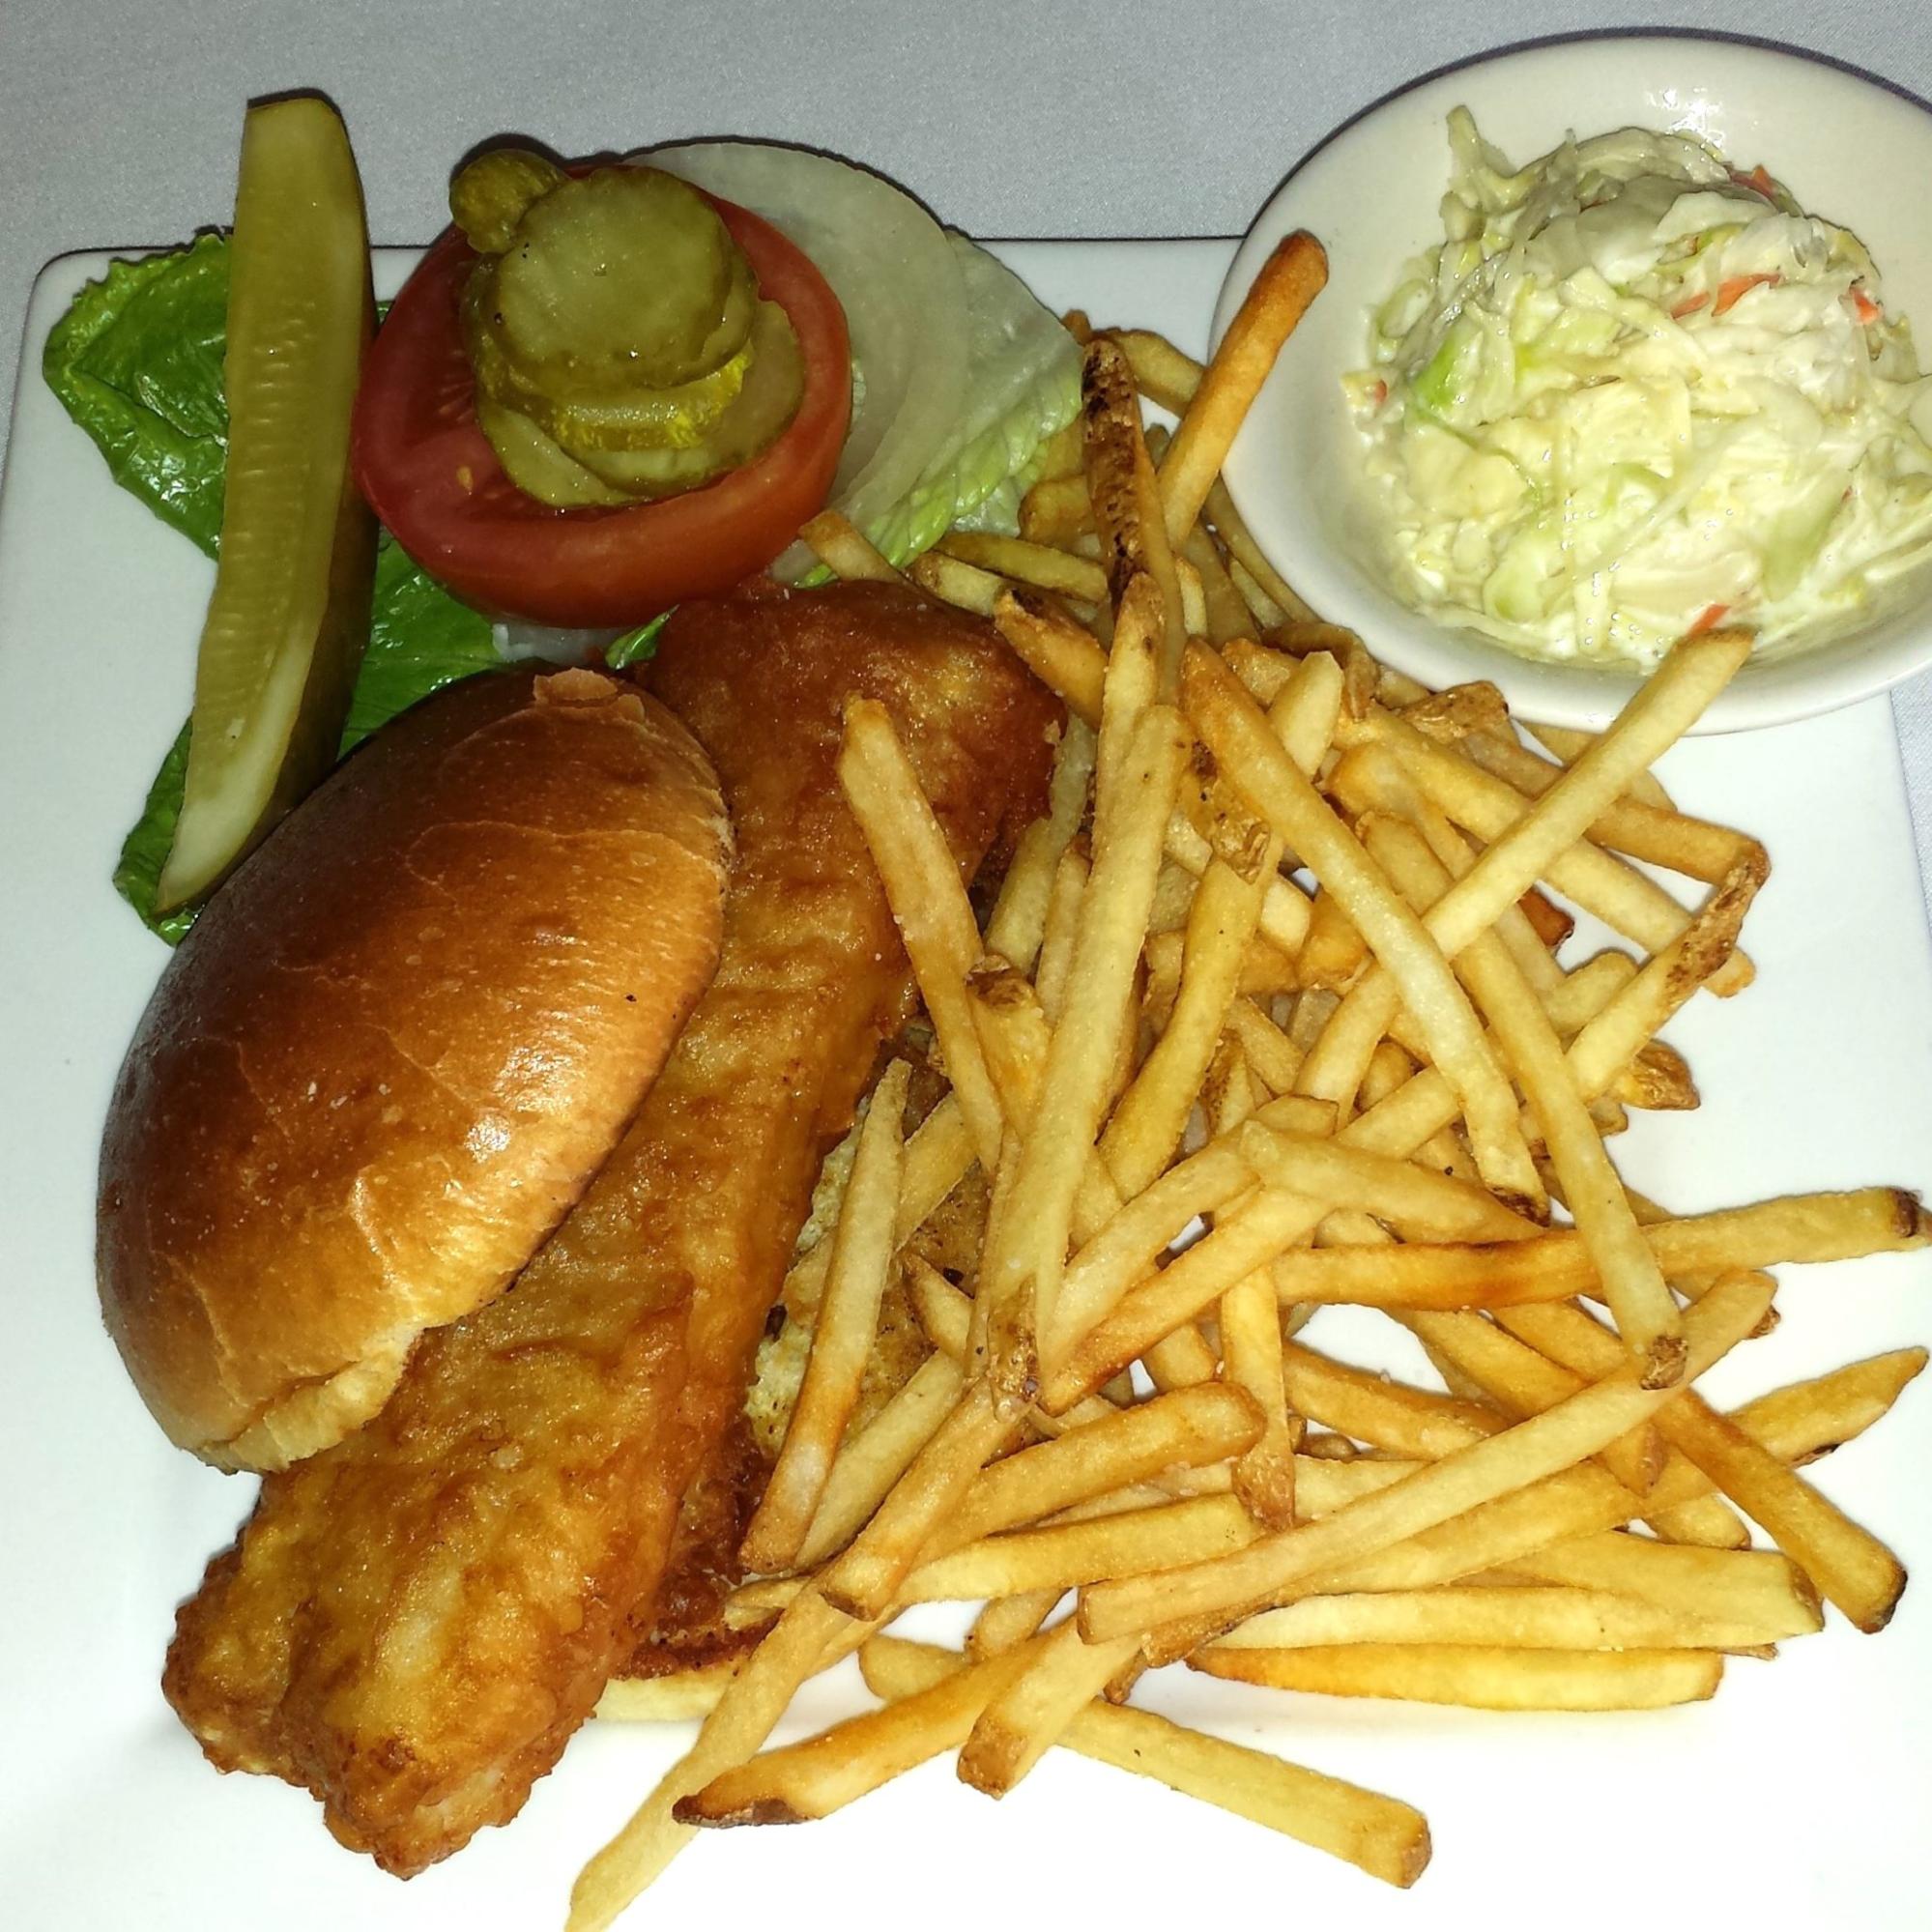 A plate of coleslaw, a fish sandwich, fries, and toppings from Hoffstot's Cafe Monaco.